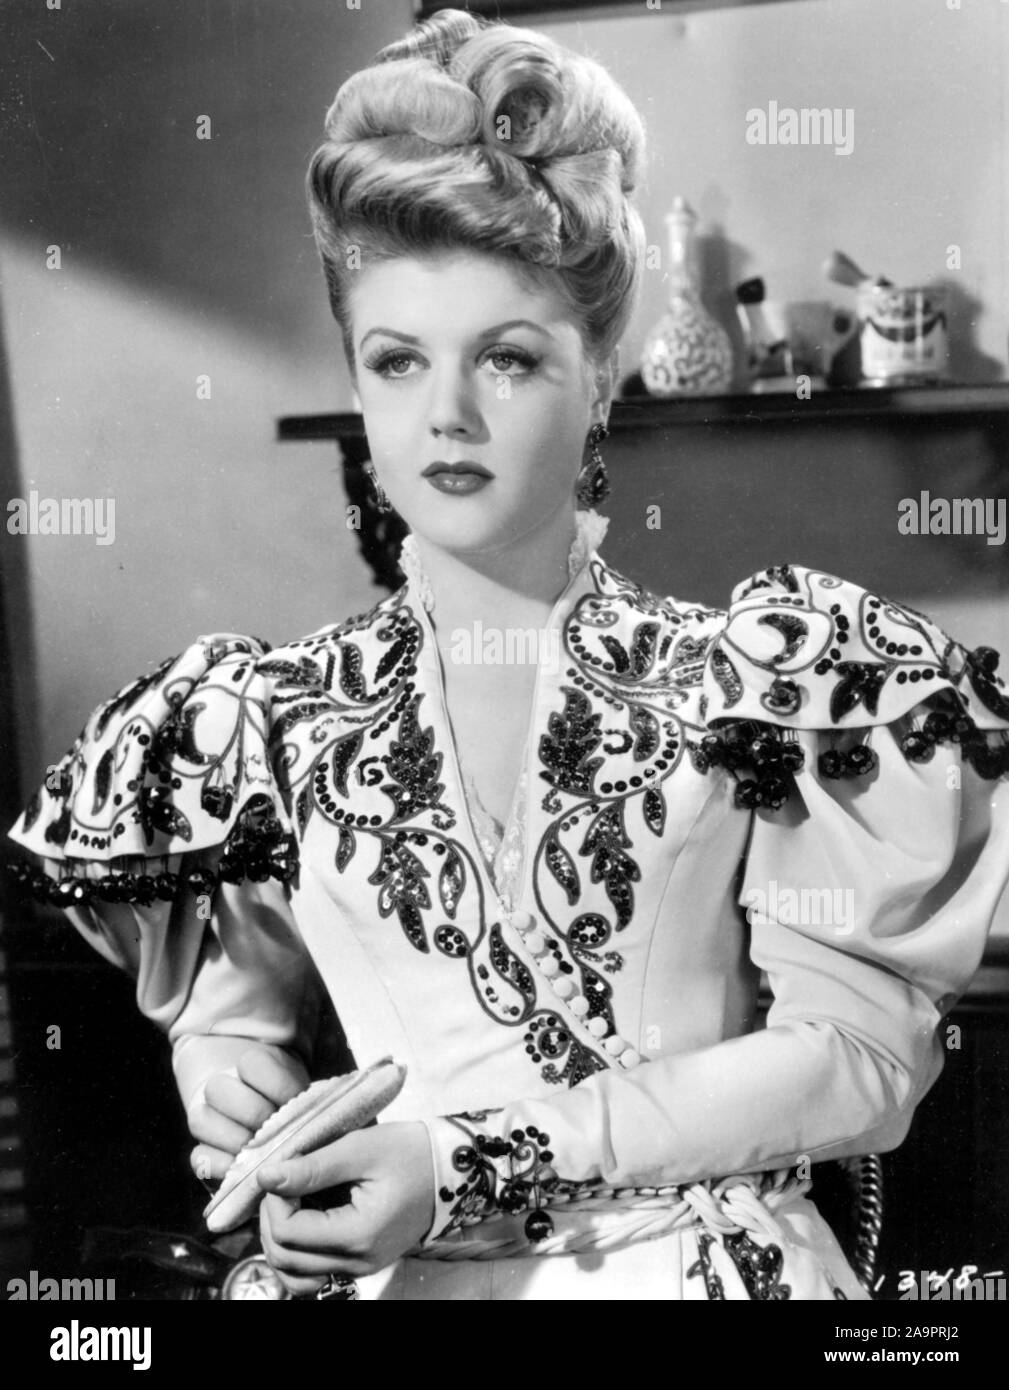 ANGELA LANSBURY in THE HARVEY GIRLS (1946), directed by GEORGE SIDNEY. Credit: M.G.M. / Album Stock Photo